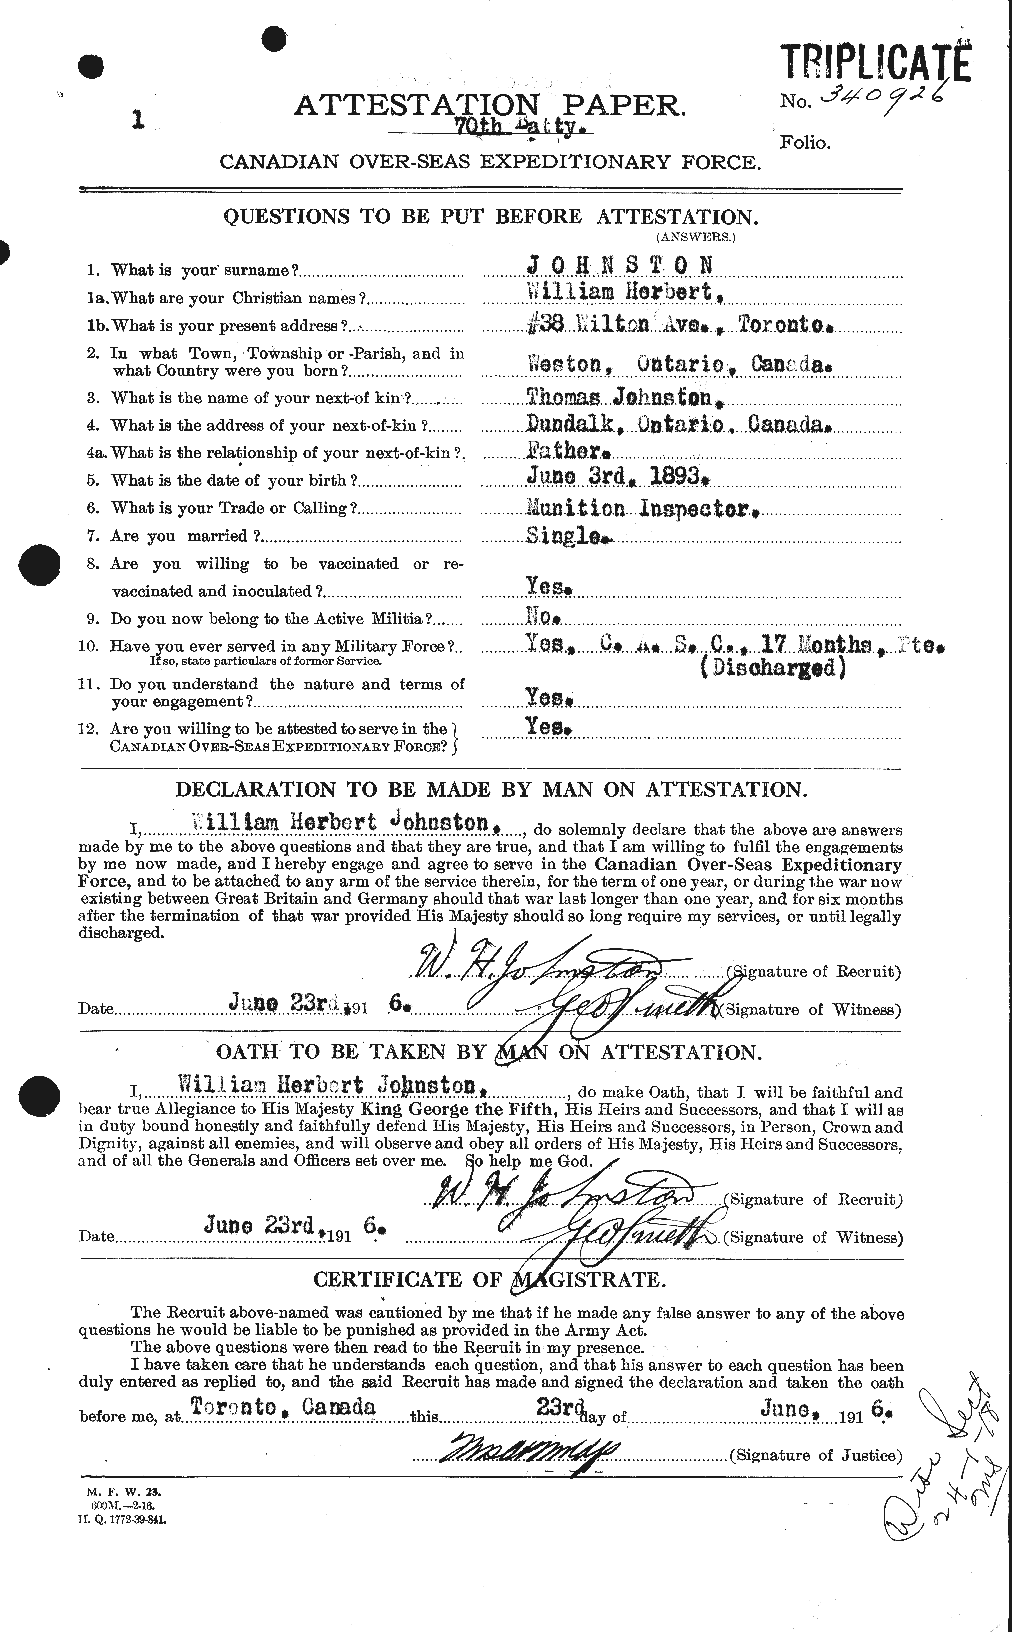 Personnel Records of the First World War - CEF 427347a